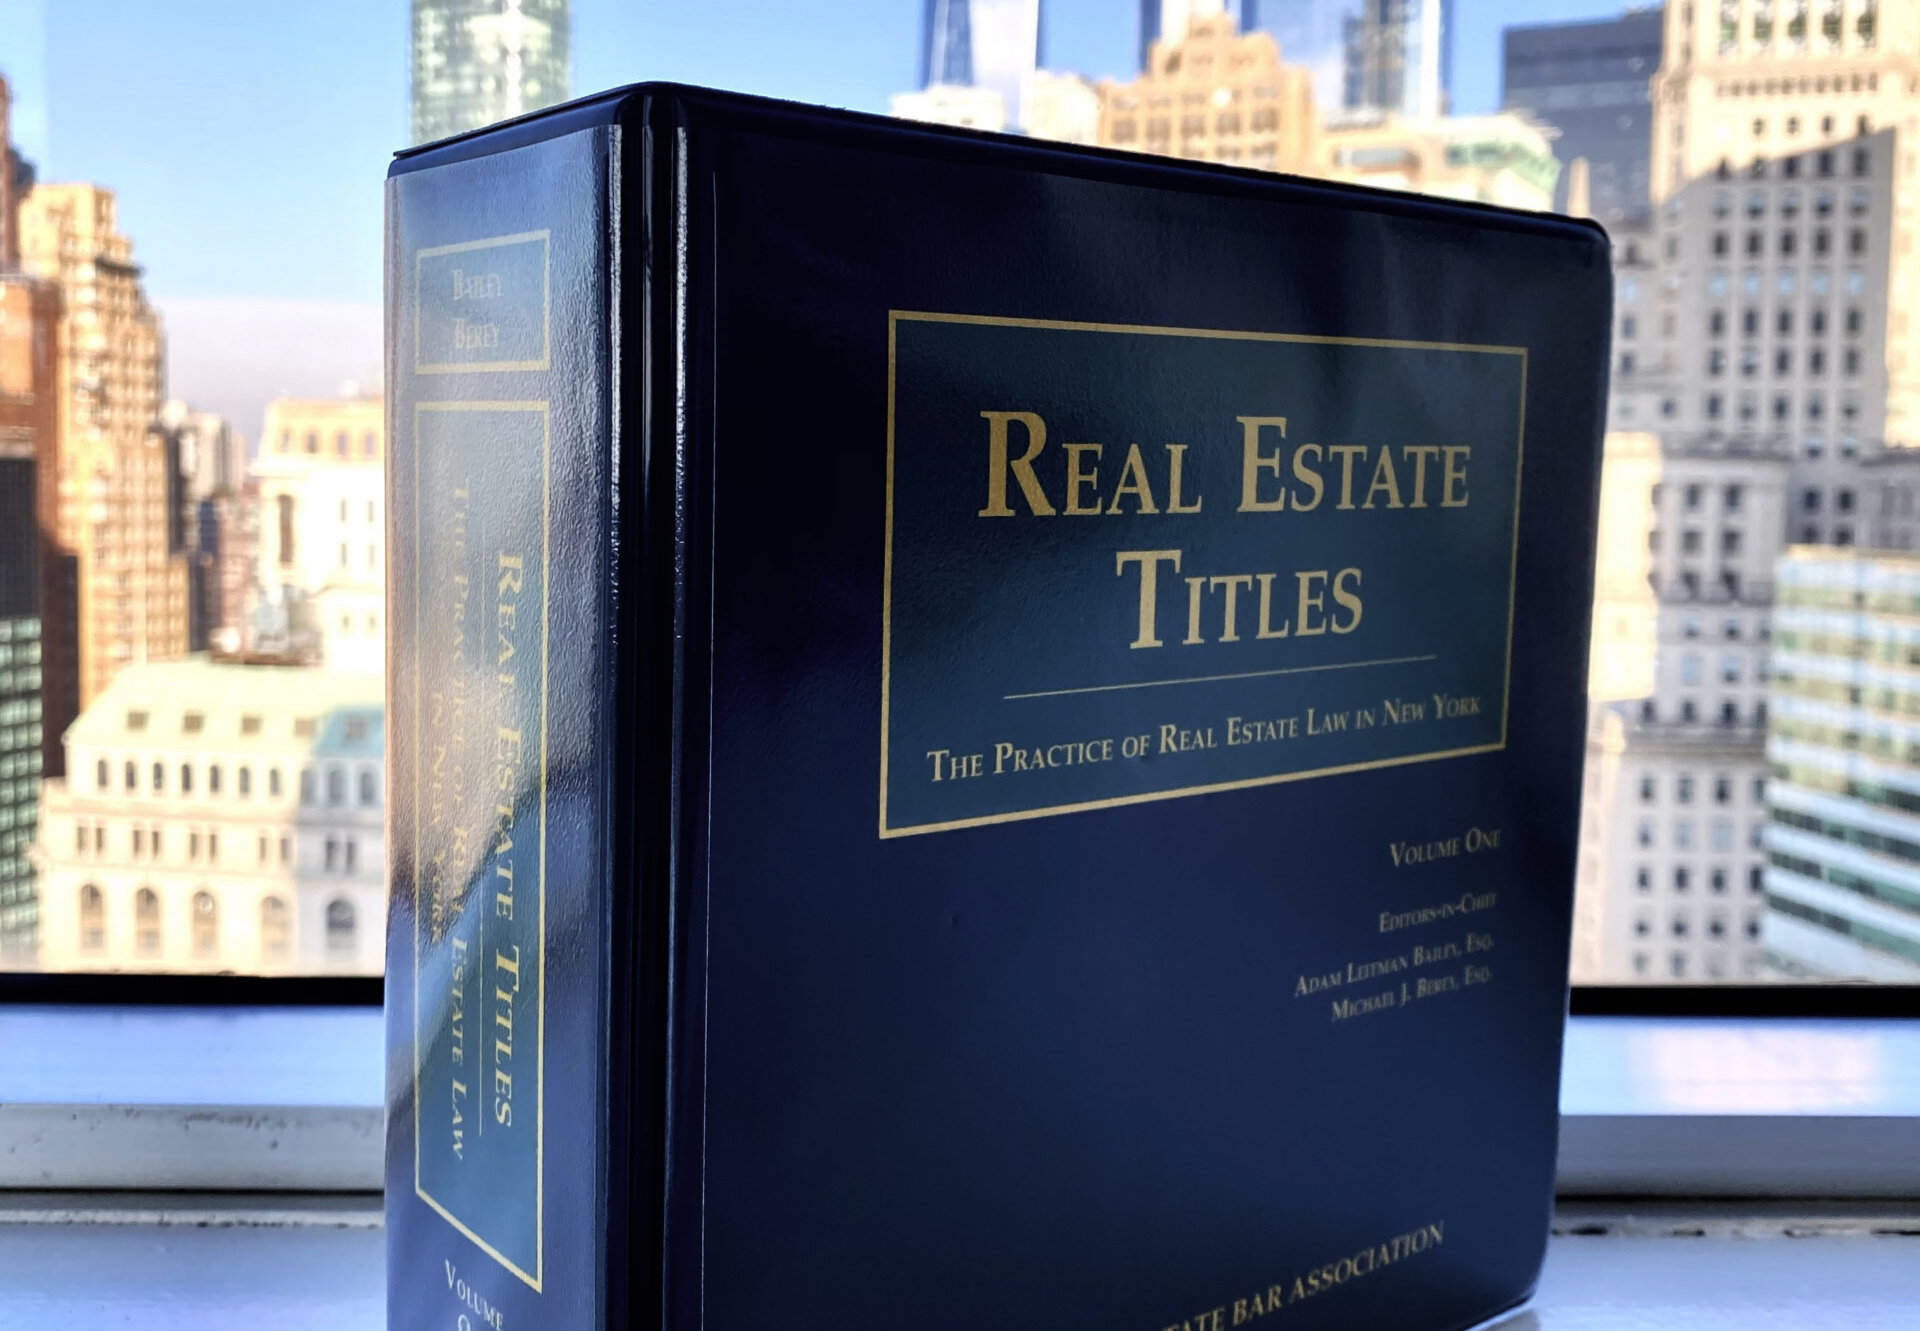 New York Law Journal Book Review New York State Bar Association Real